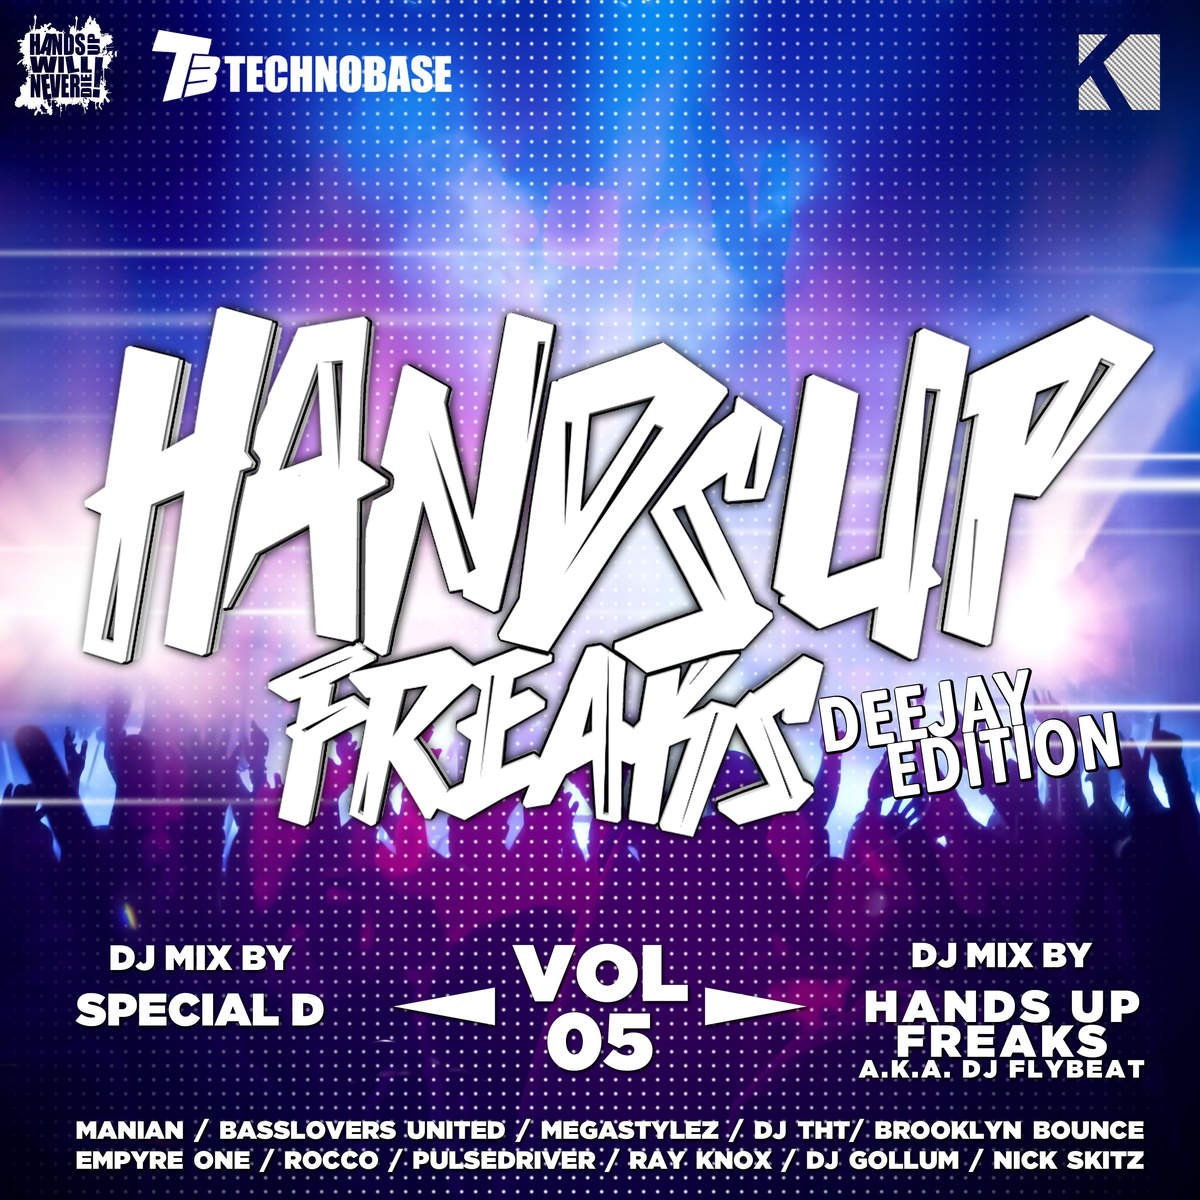 Hands up Freaks, Vol. 5 (Deejay Edition)